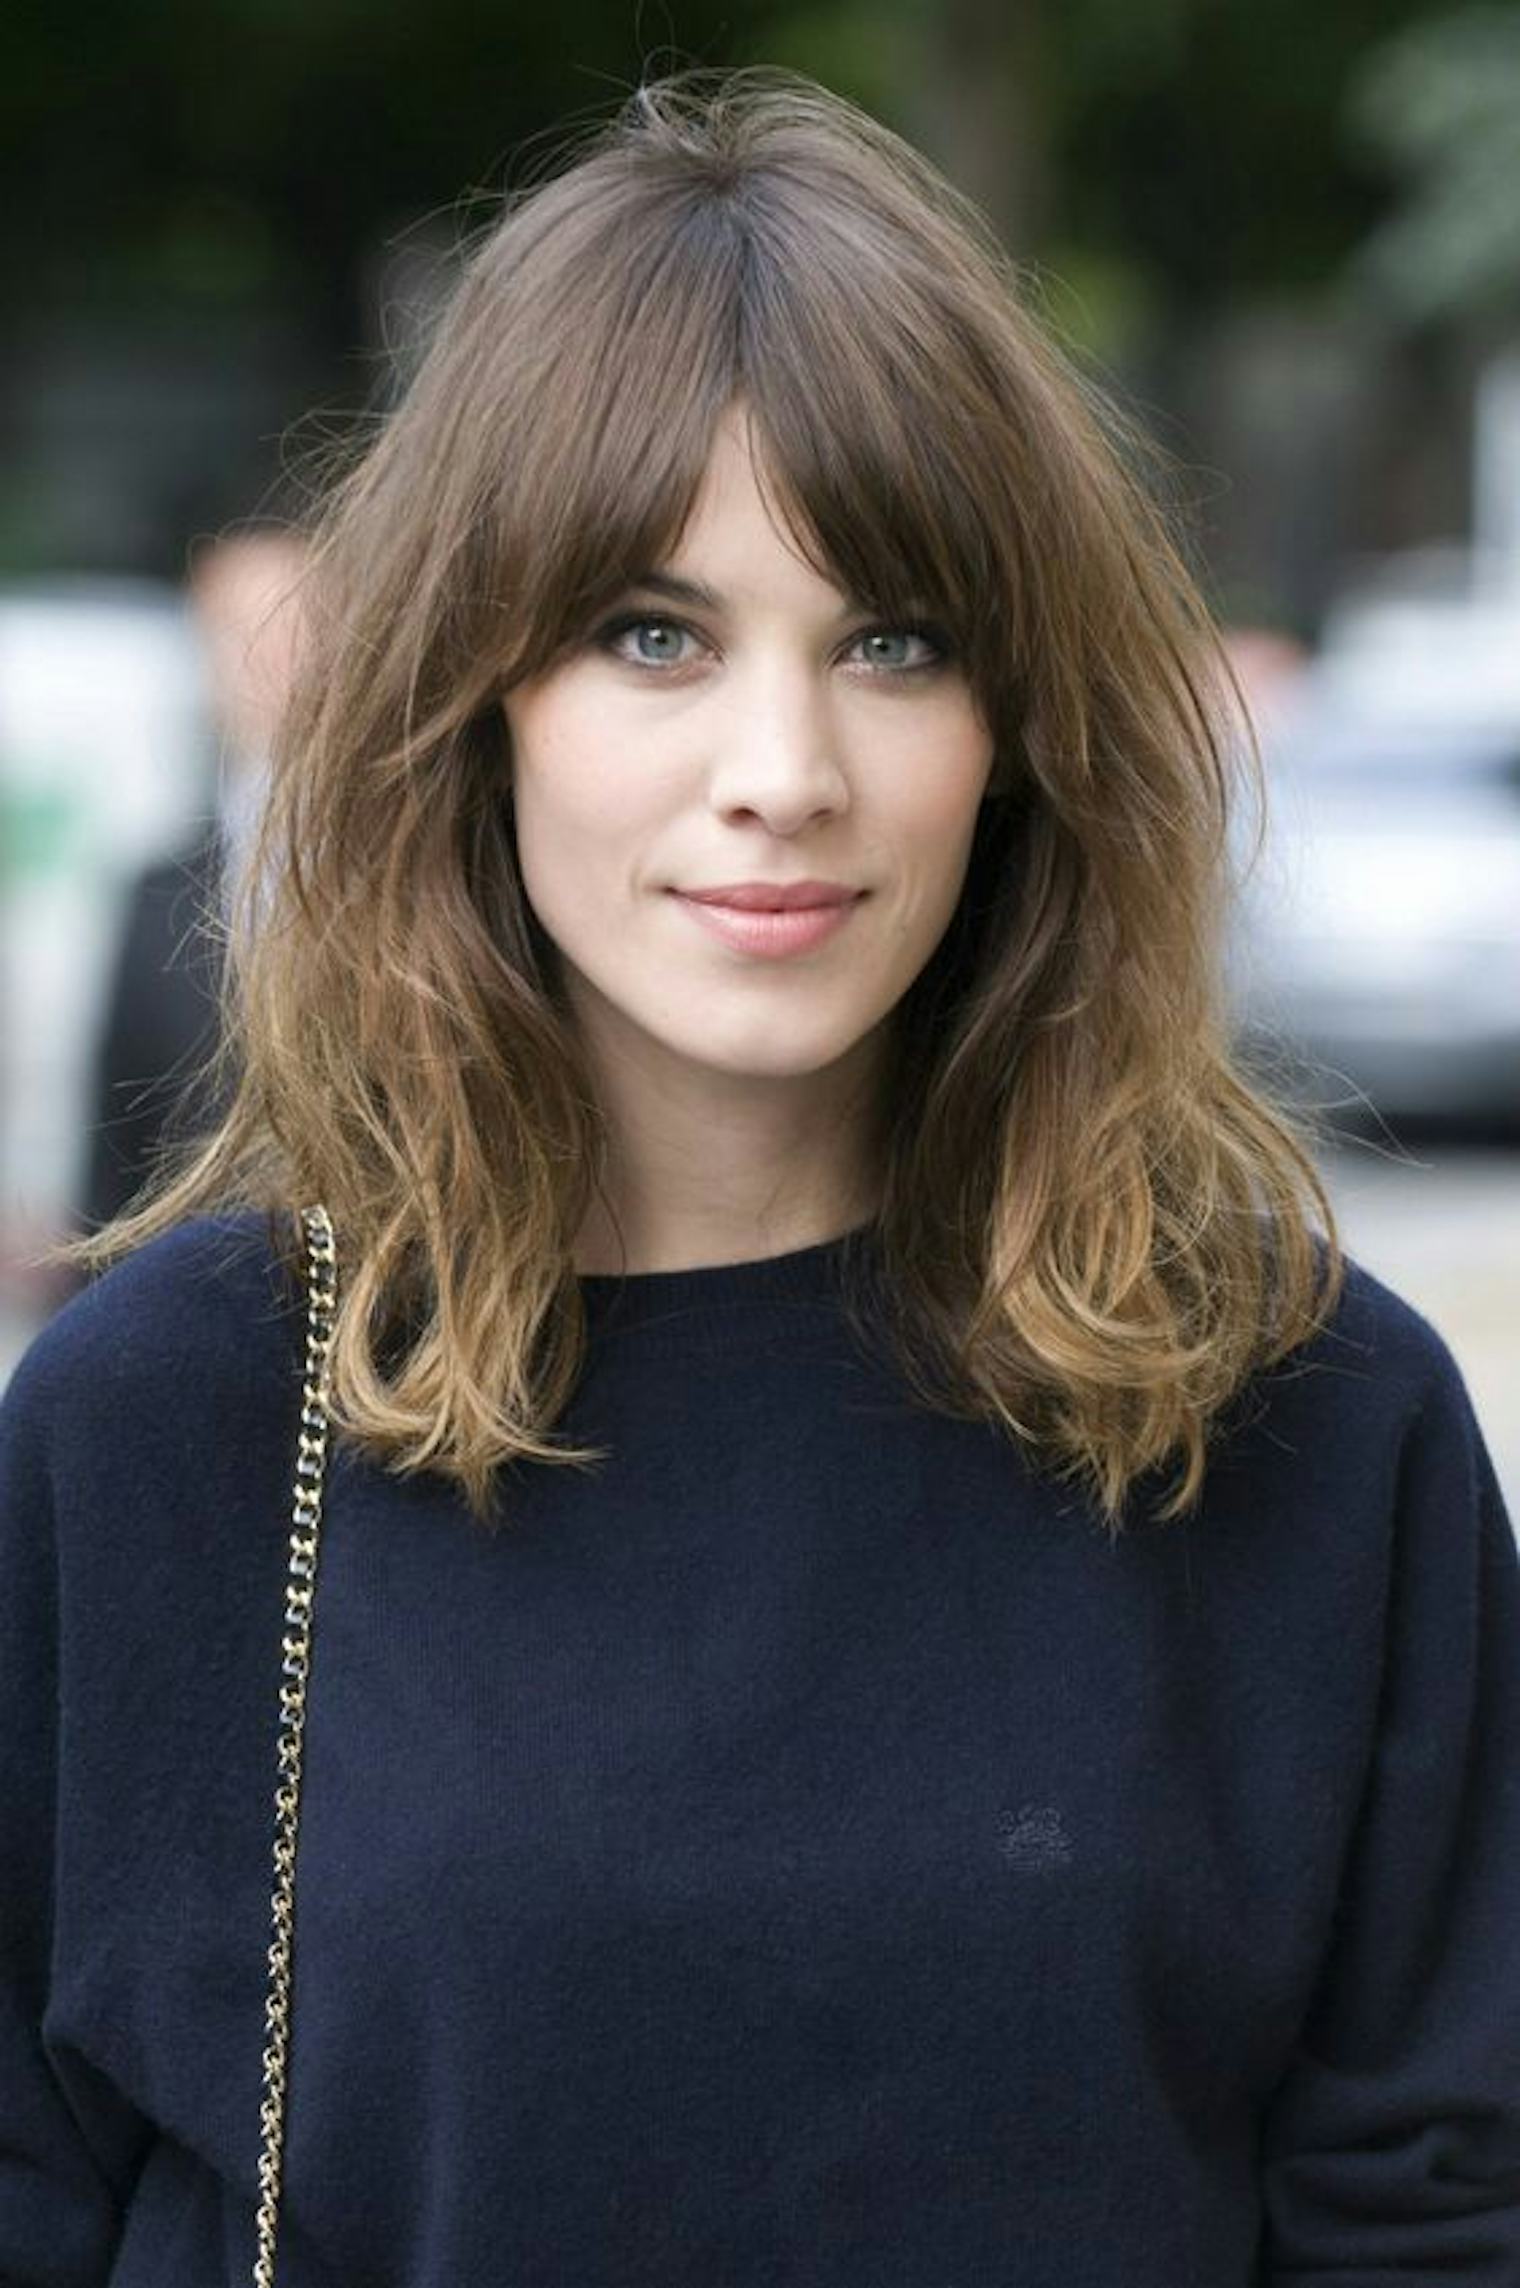 This FrenchGirl Hairstyle Is Trending On Pinterest, And We’re Obsessed